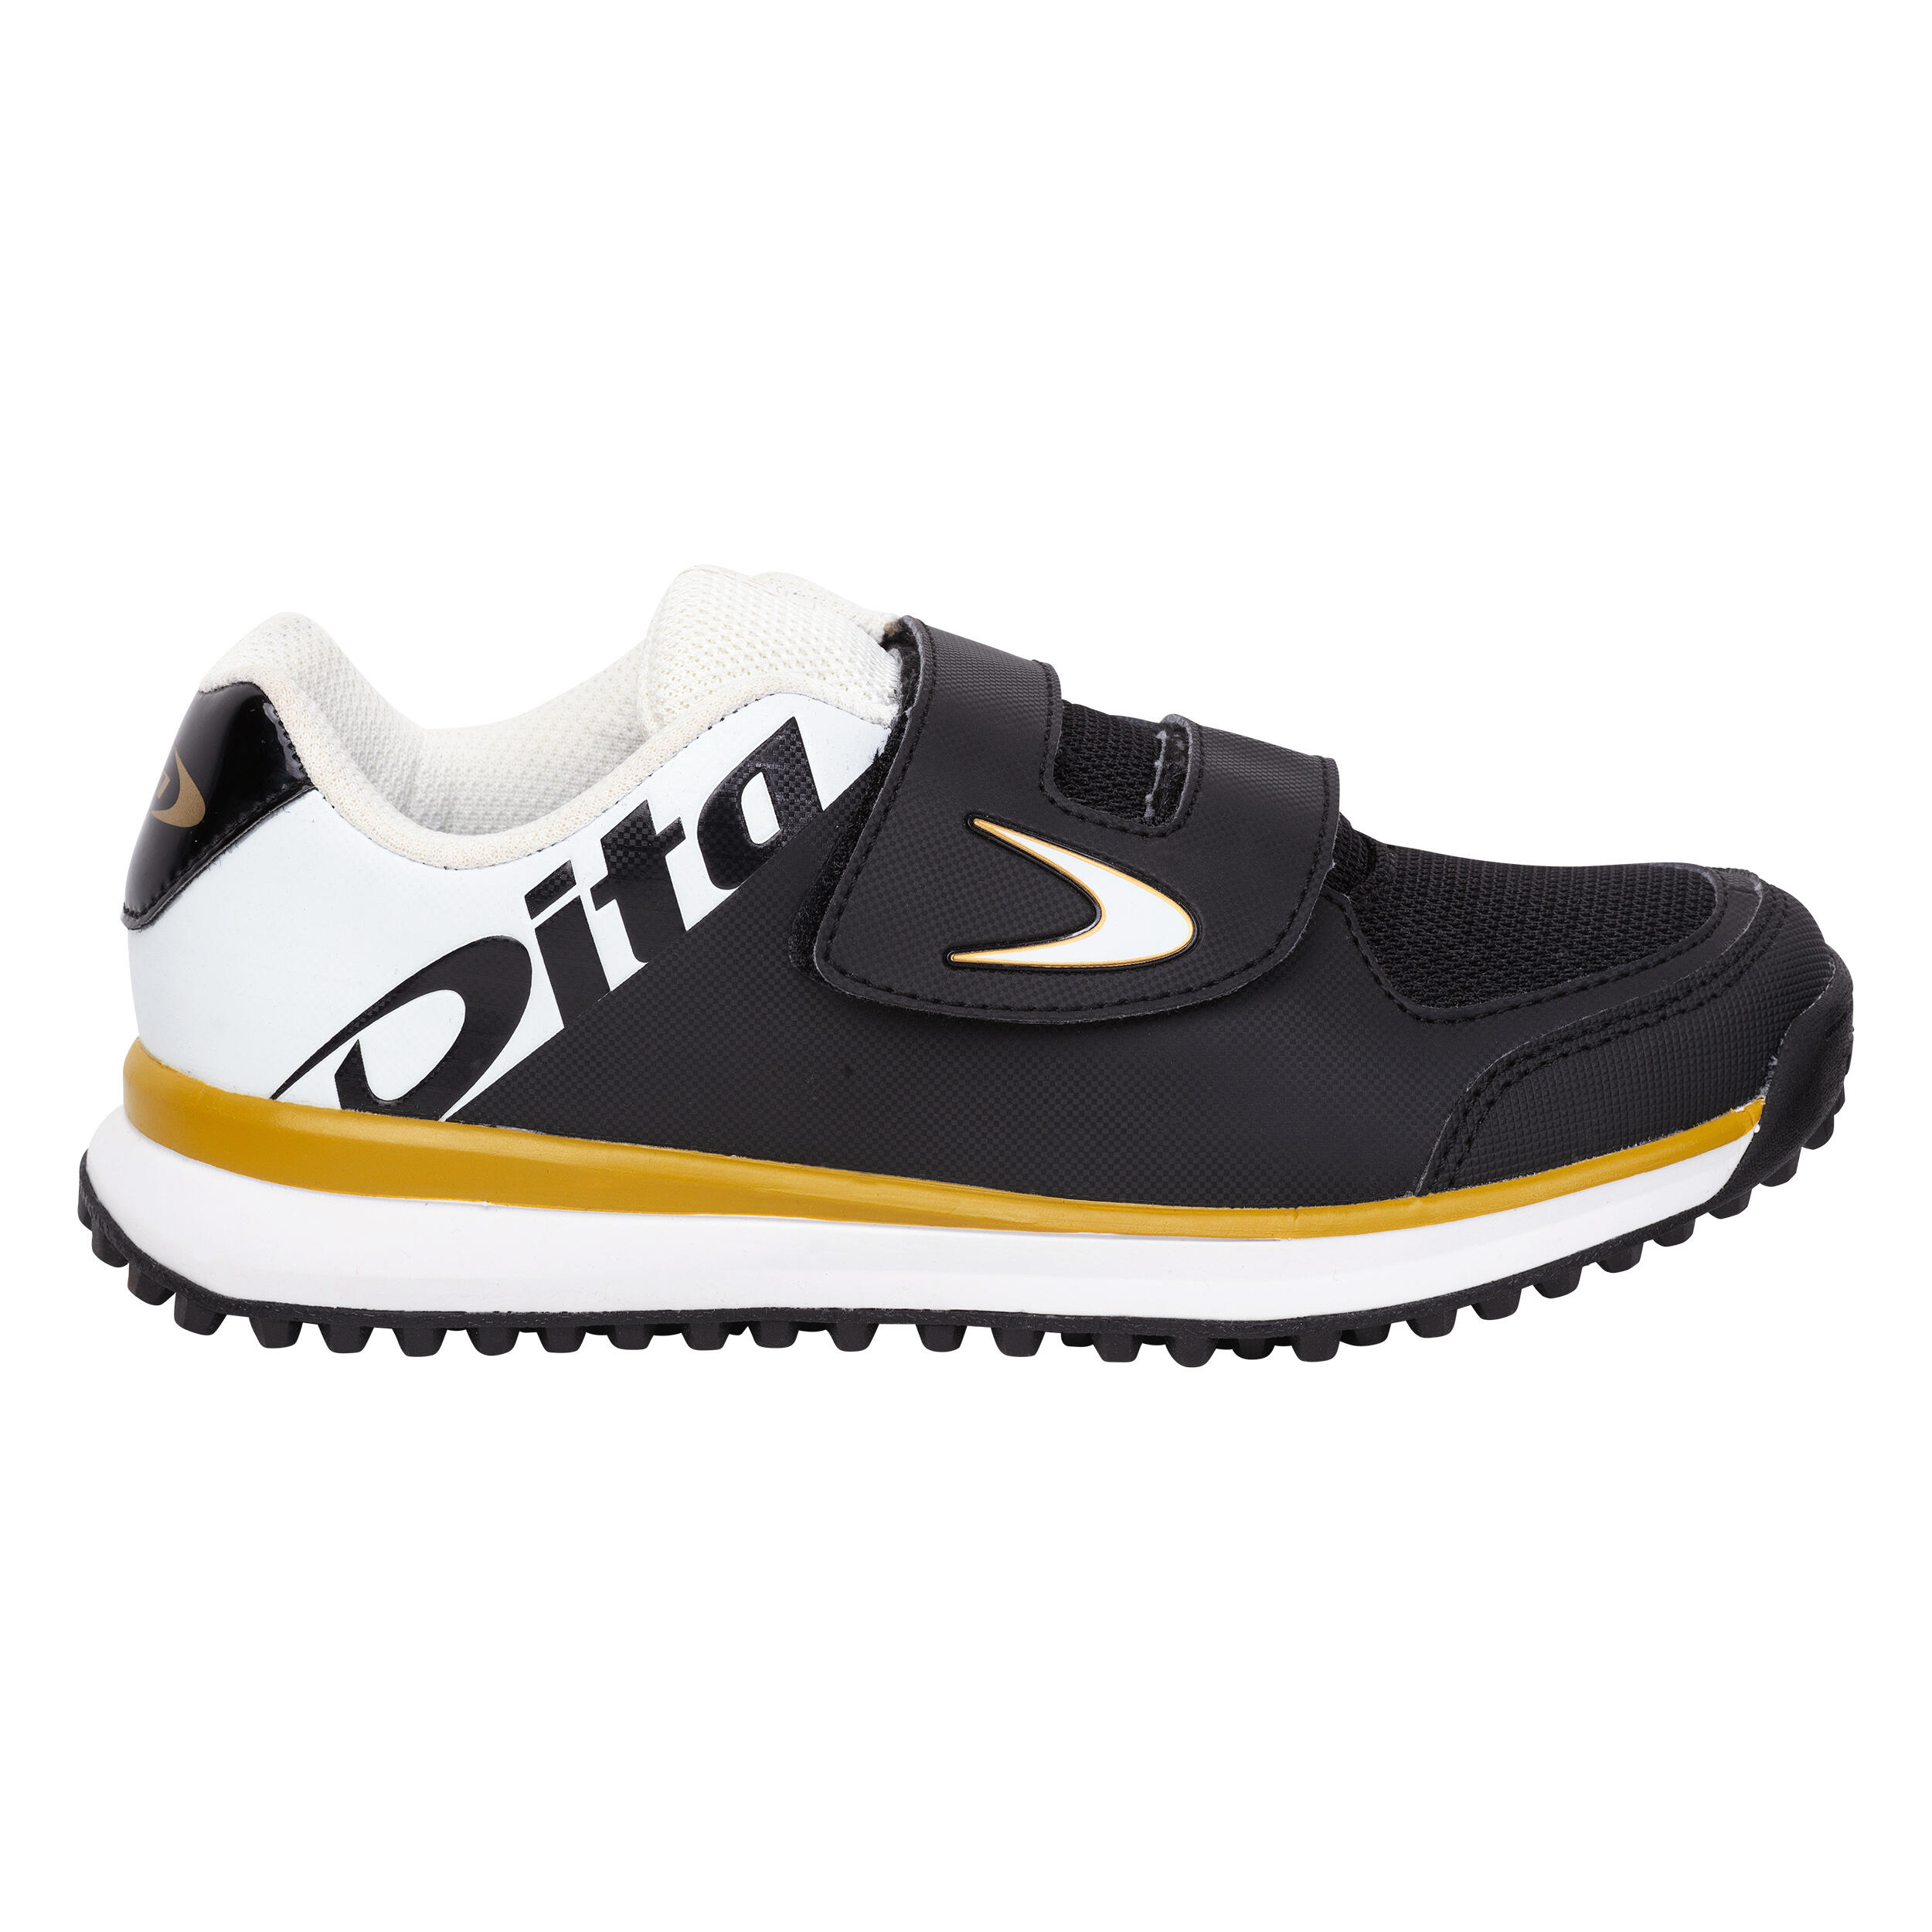 Kids' Low-Intensity Field Hockey Shoes Fix And Go - White/Black 1/7